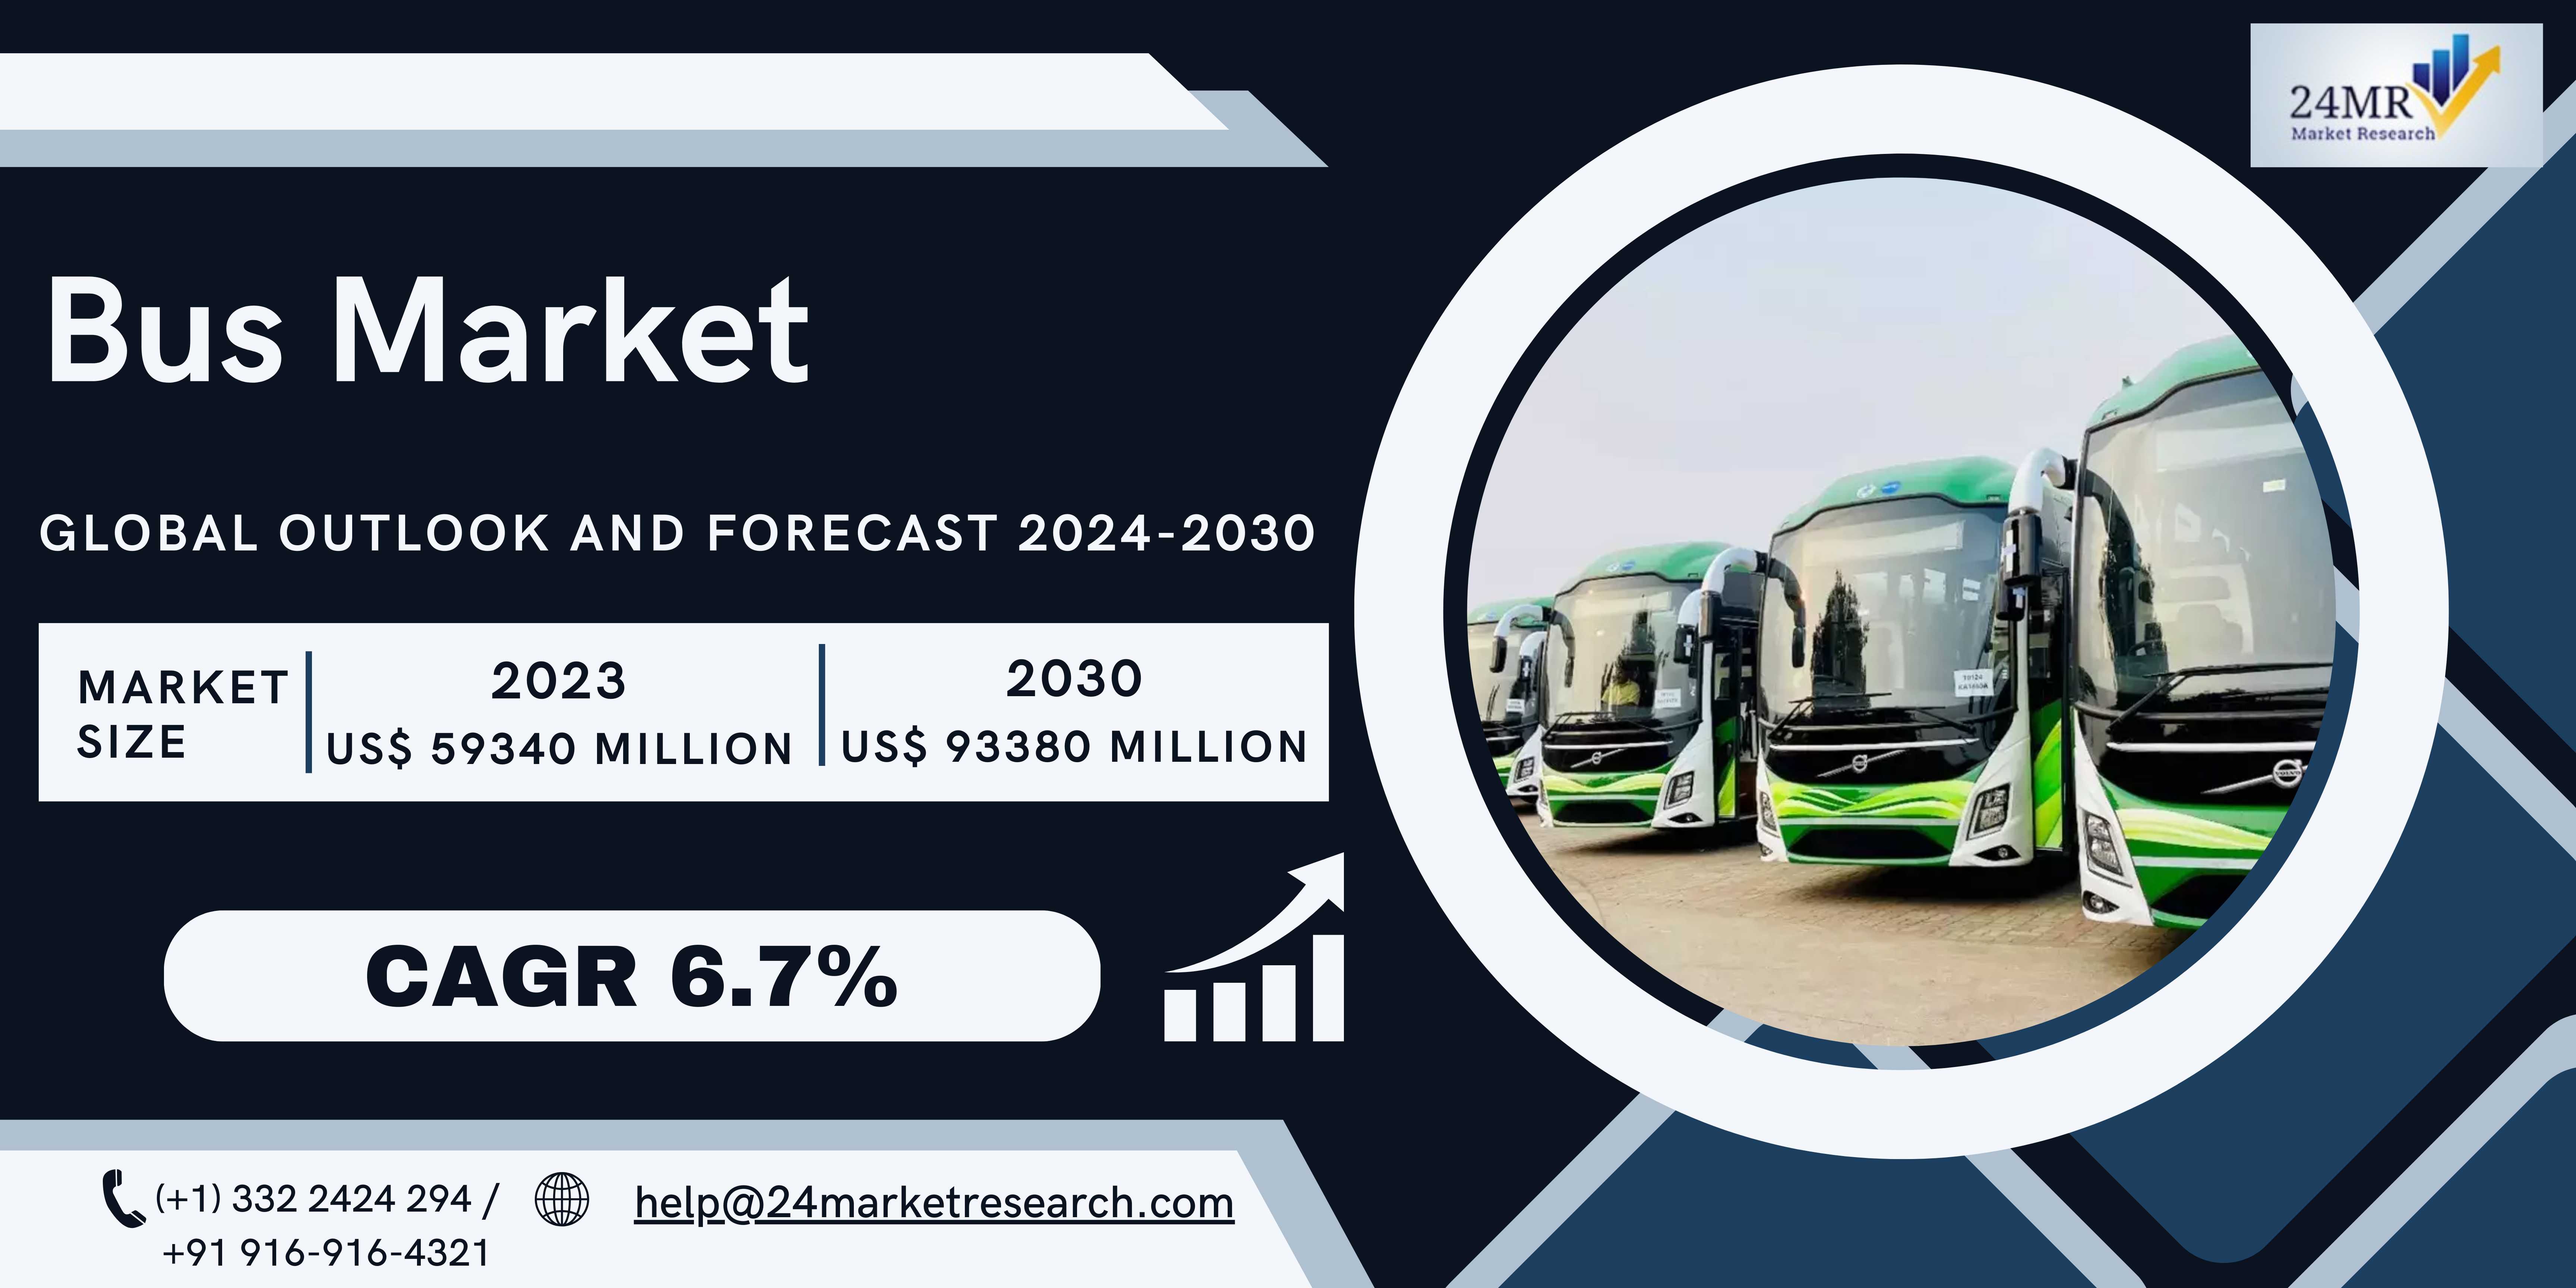 Bus Market, Global Outlook and Forecast 2024-2030 ..